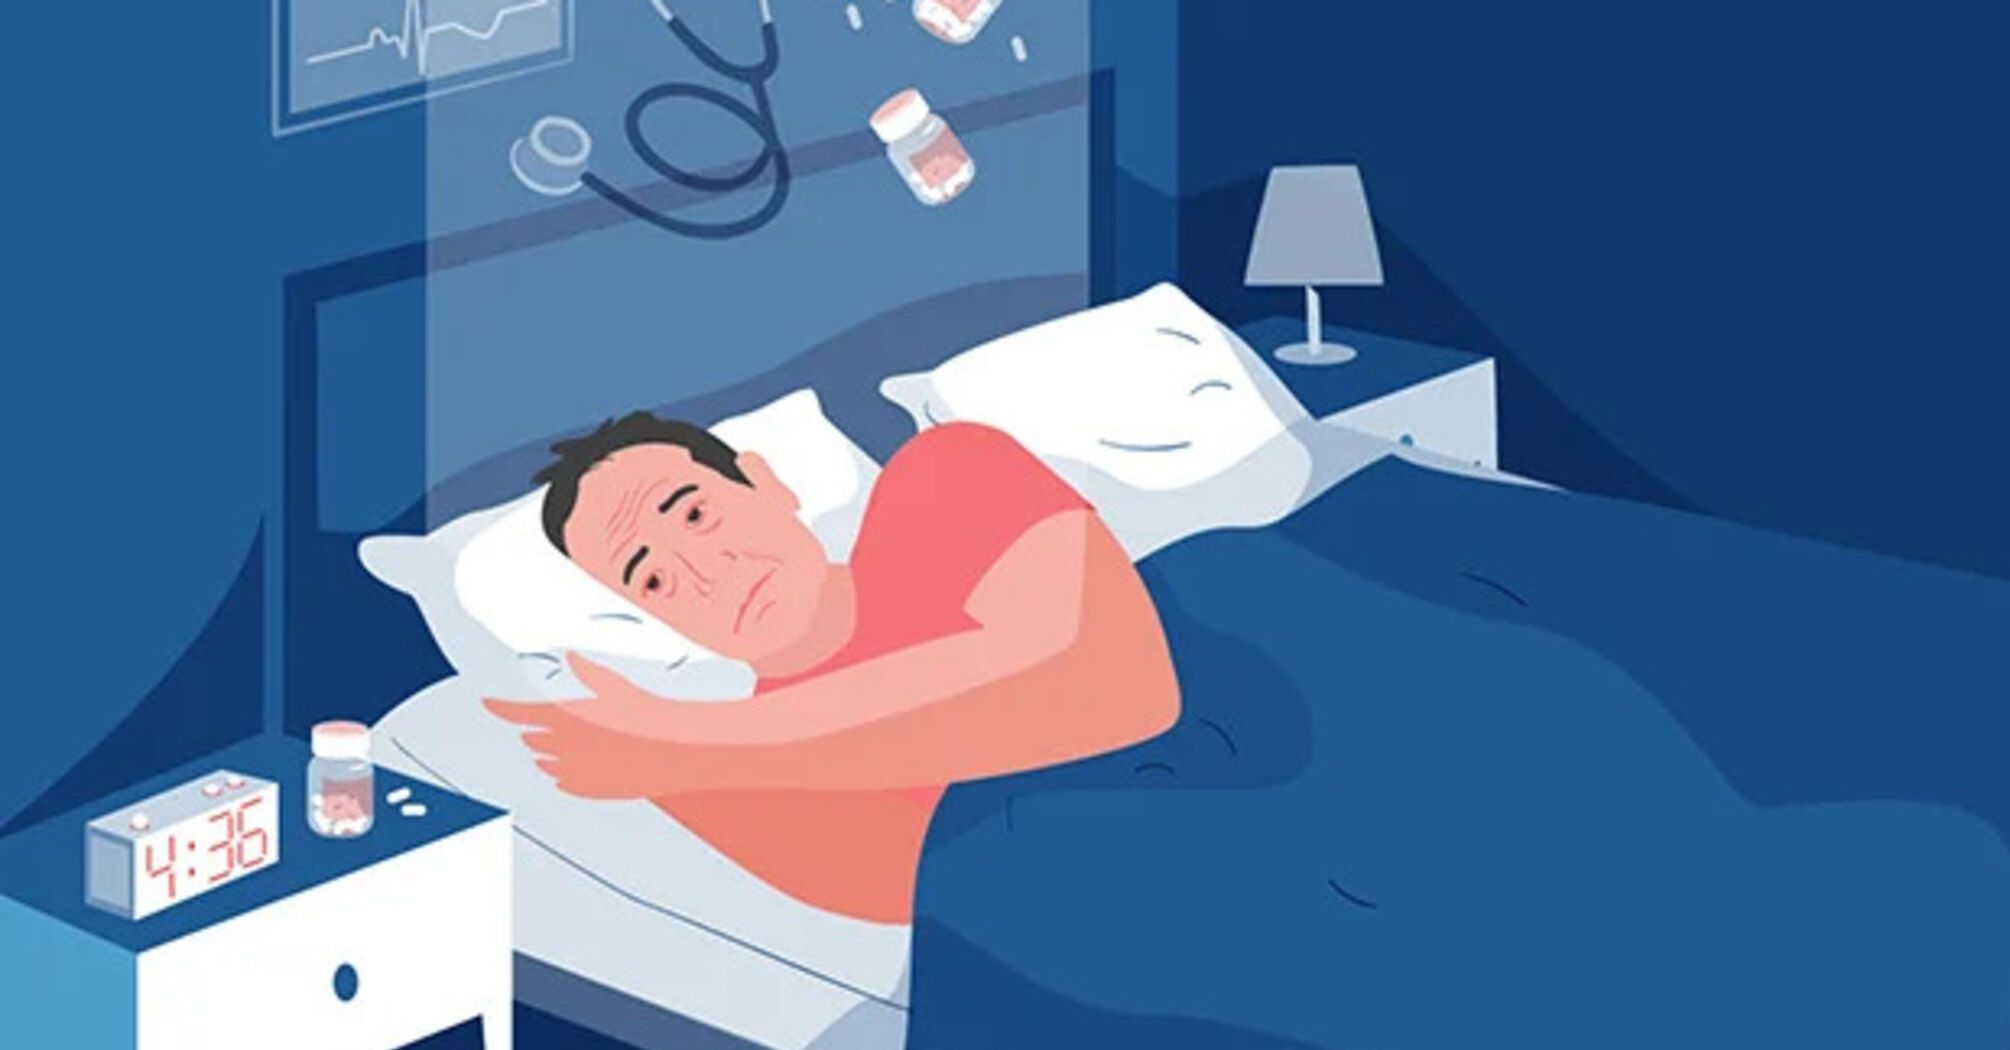 How to deal with insomnia